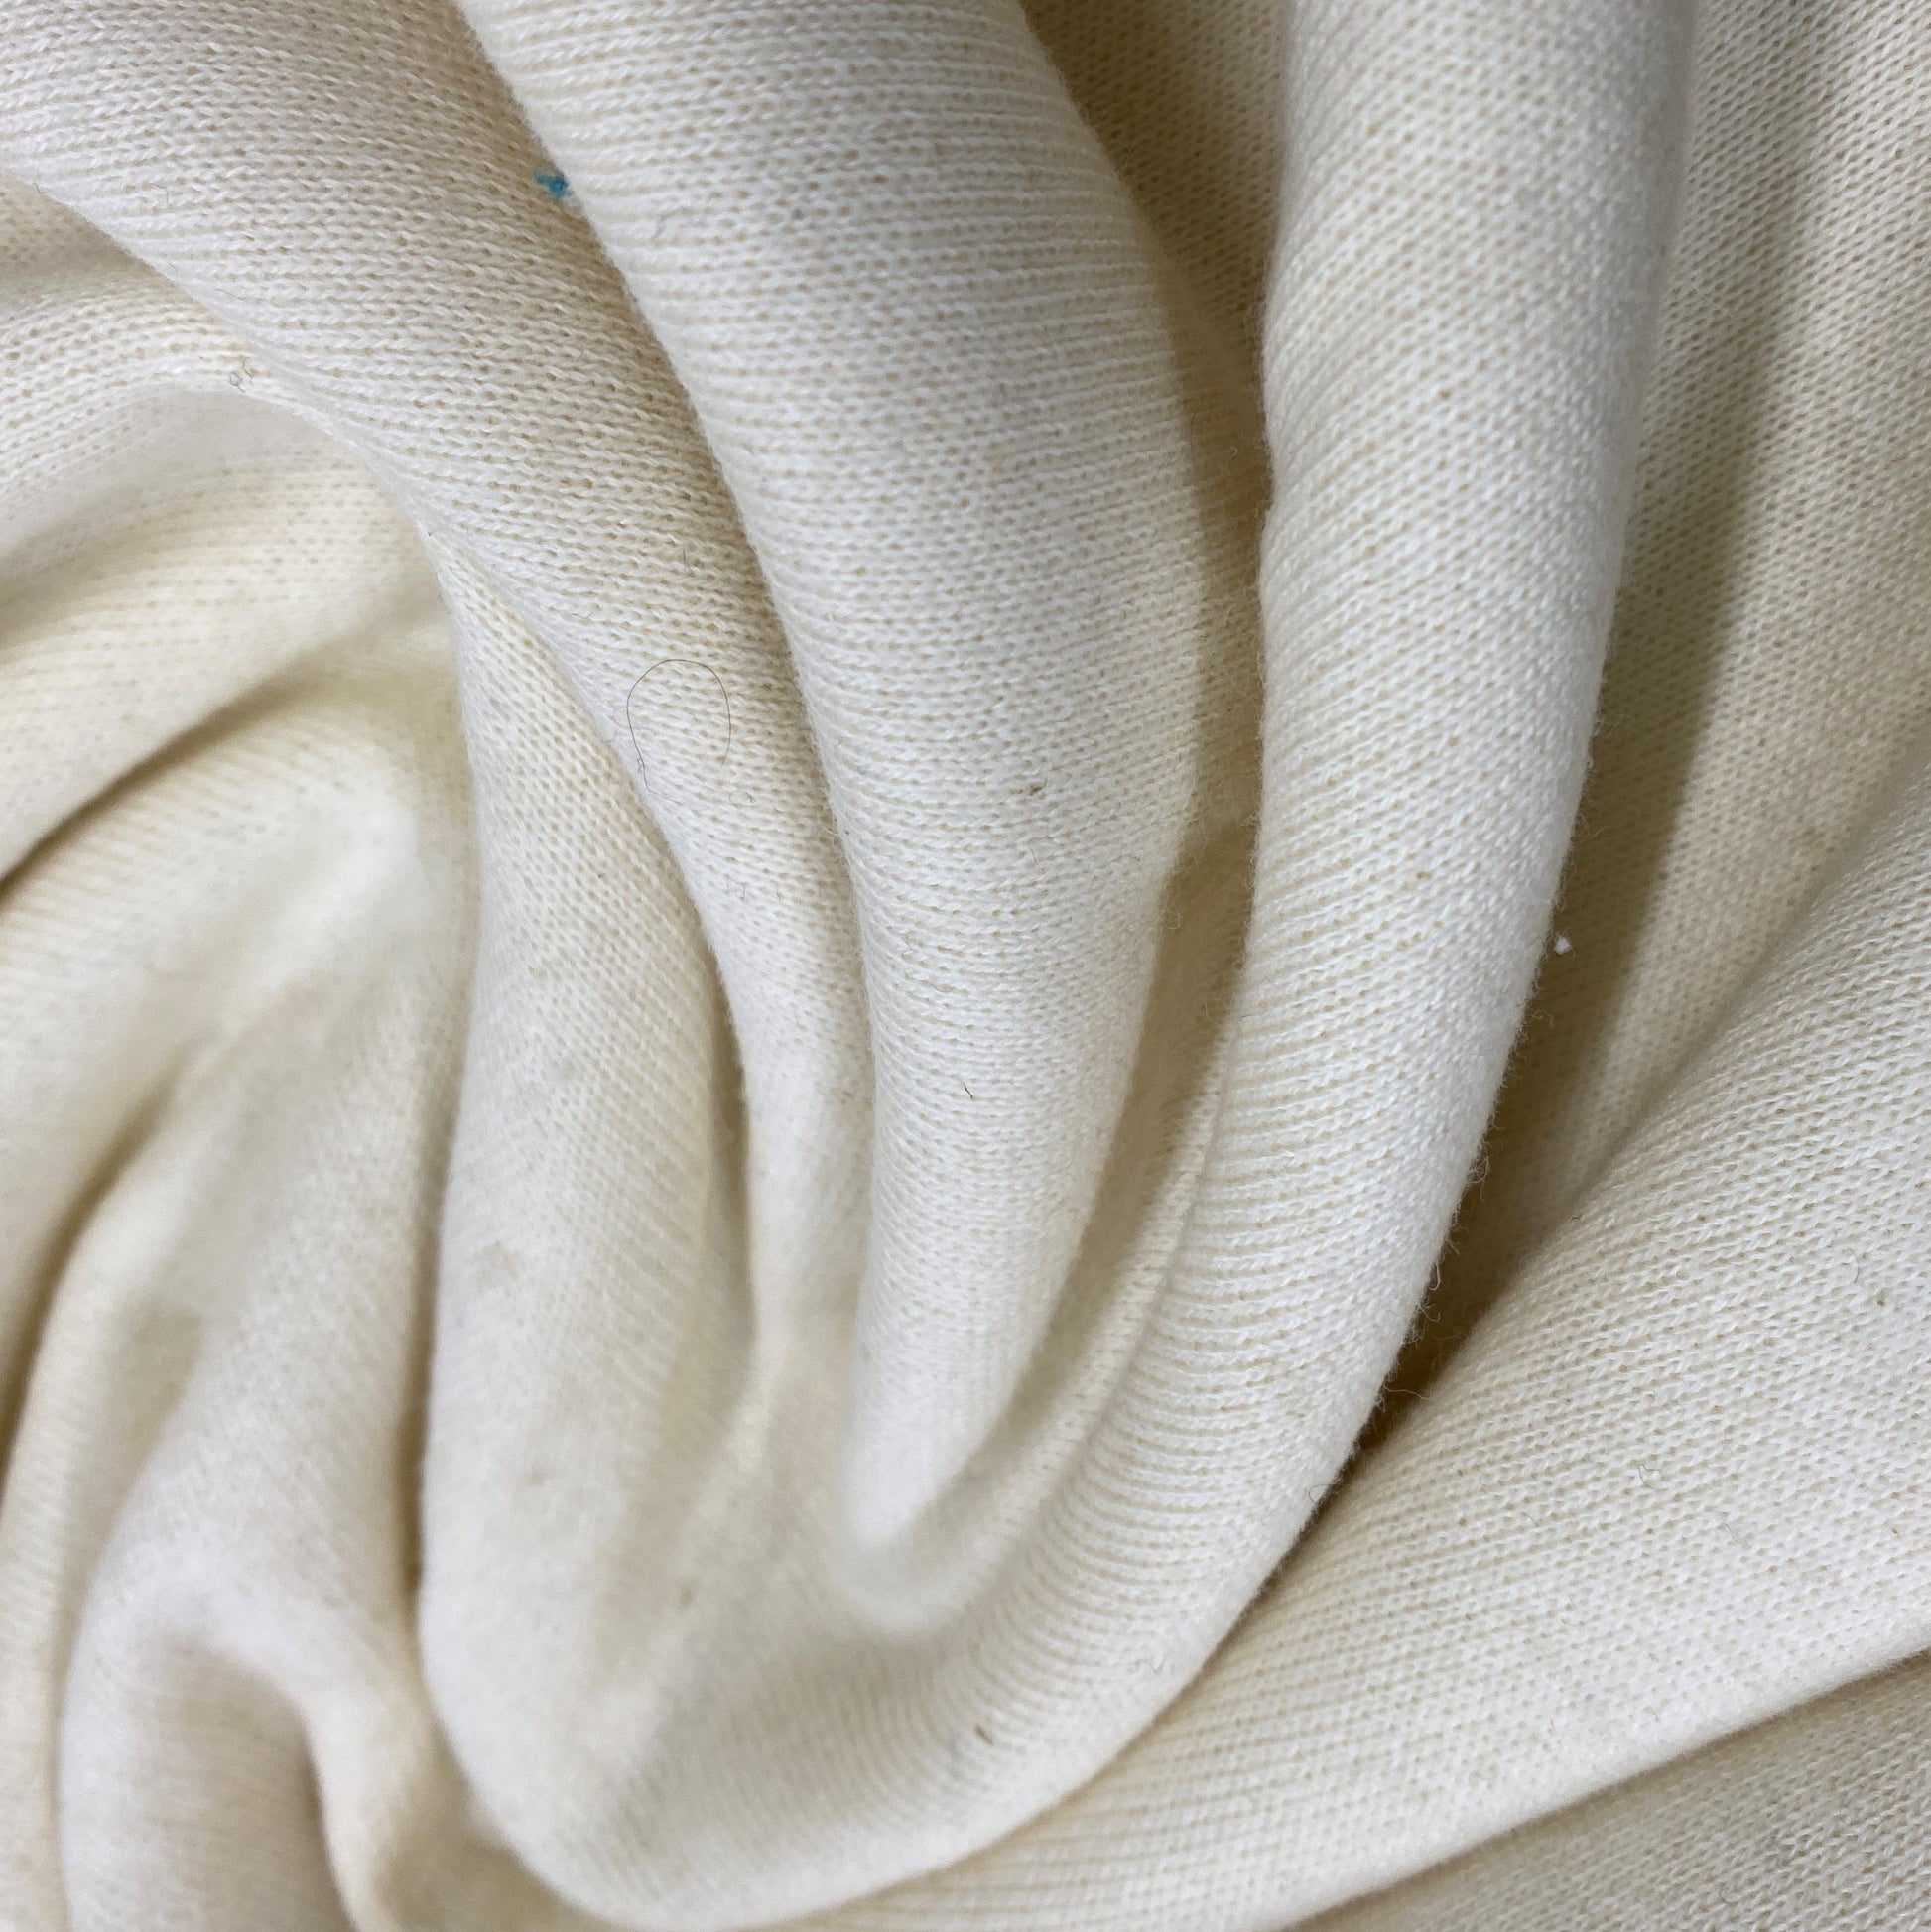 Buy 1 YD PIECE Cotton Thermal Ribbed Knit off White Thick & Soft